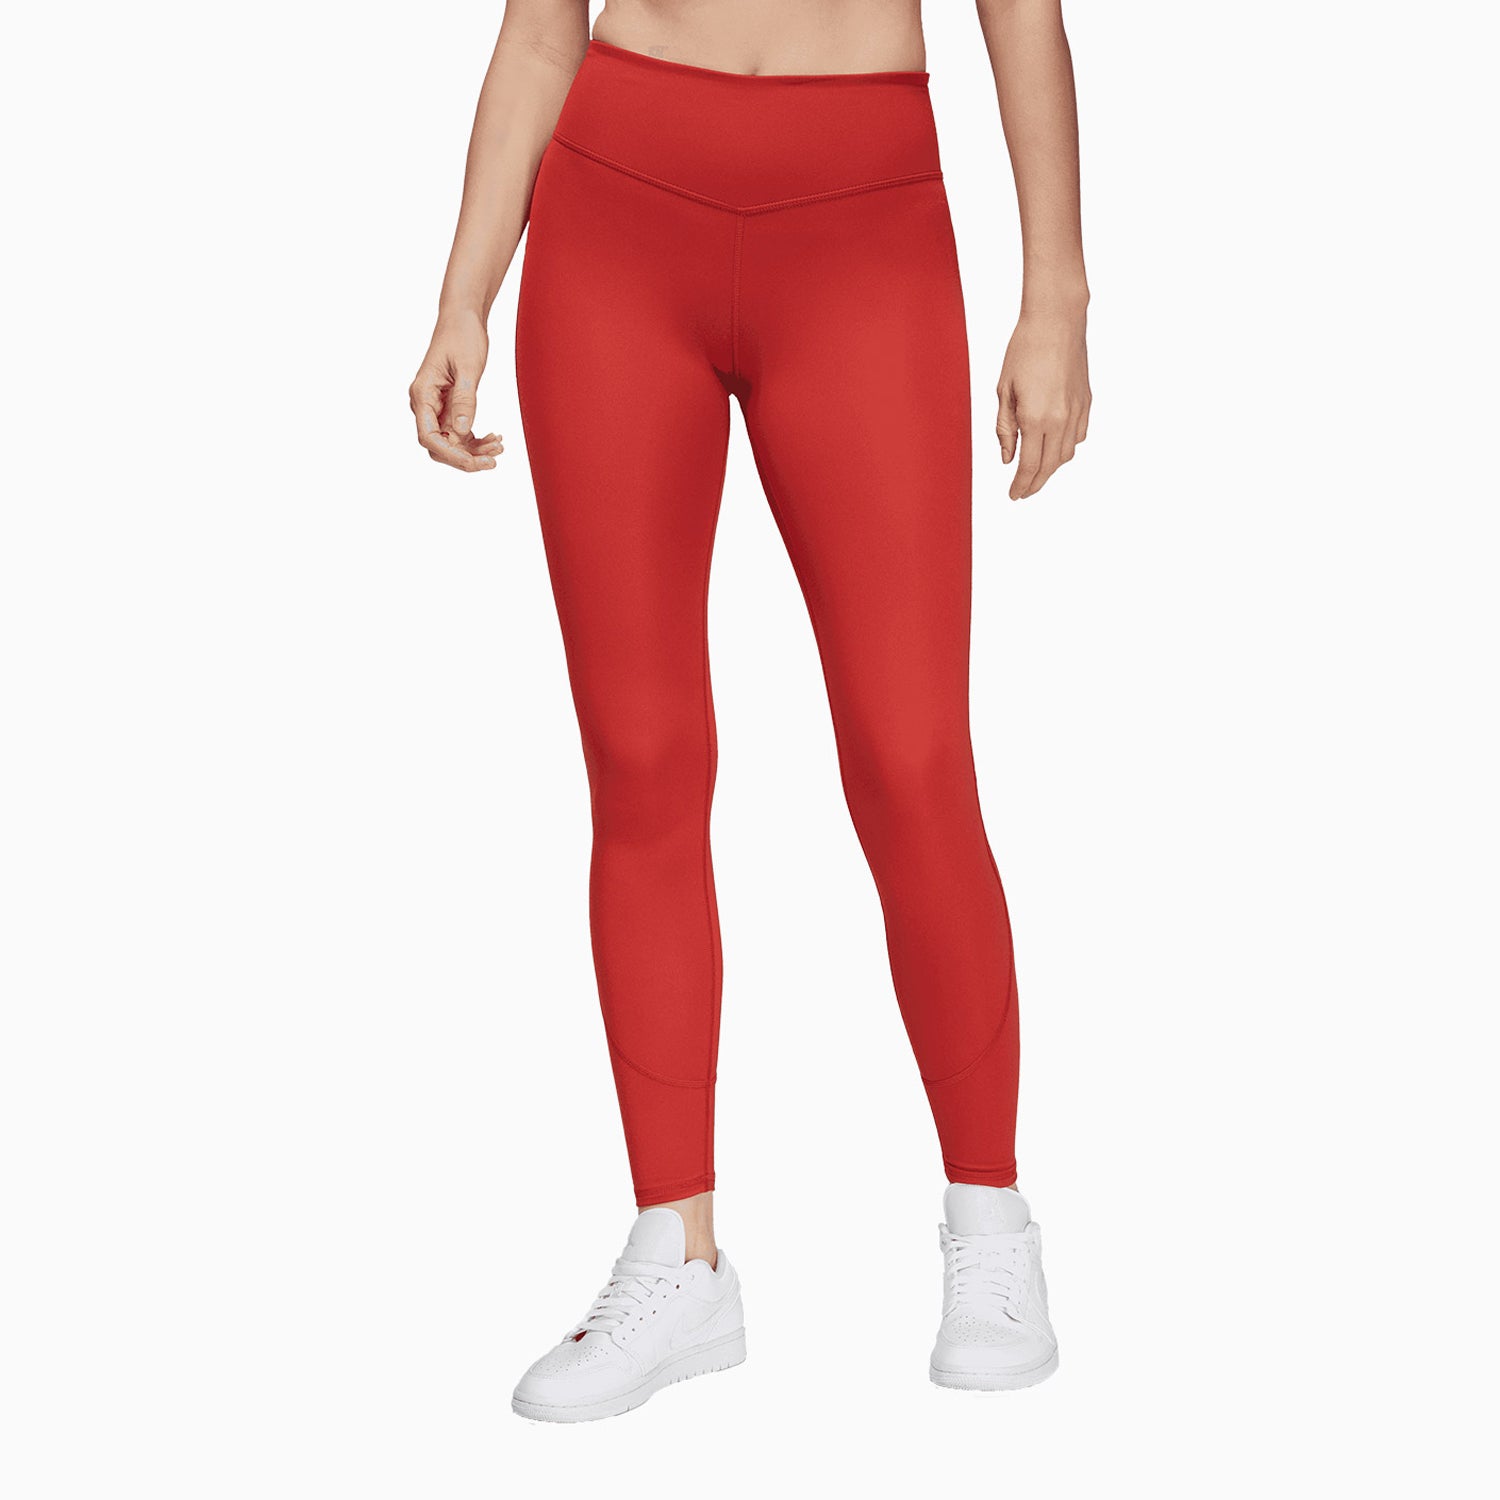 jordan-womens-woven-lined-sports-outfit-fd7869-615-fb4620-615